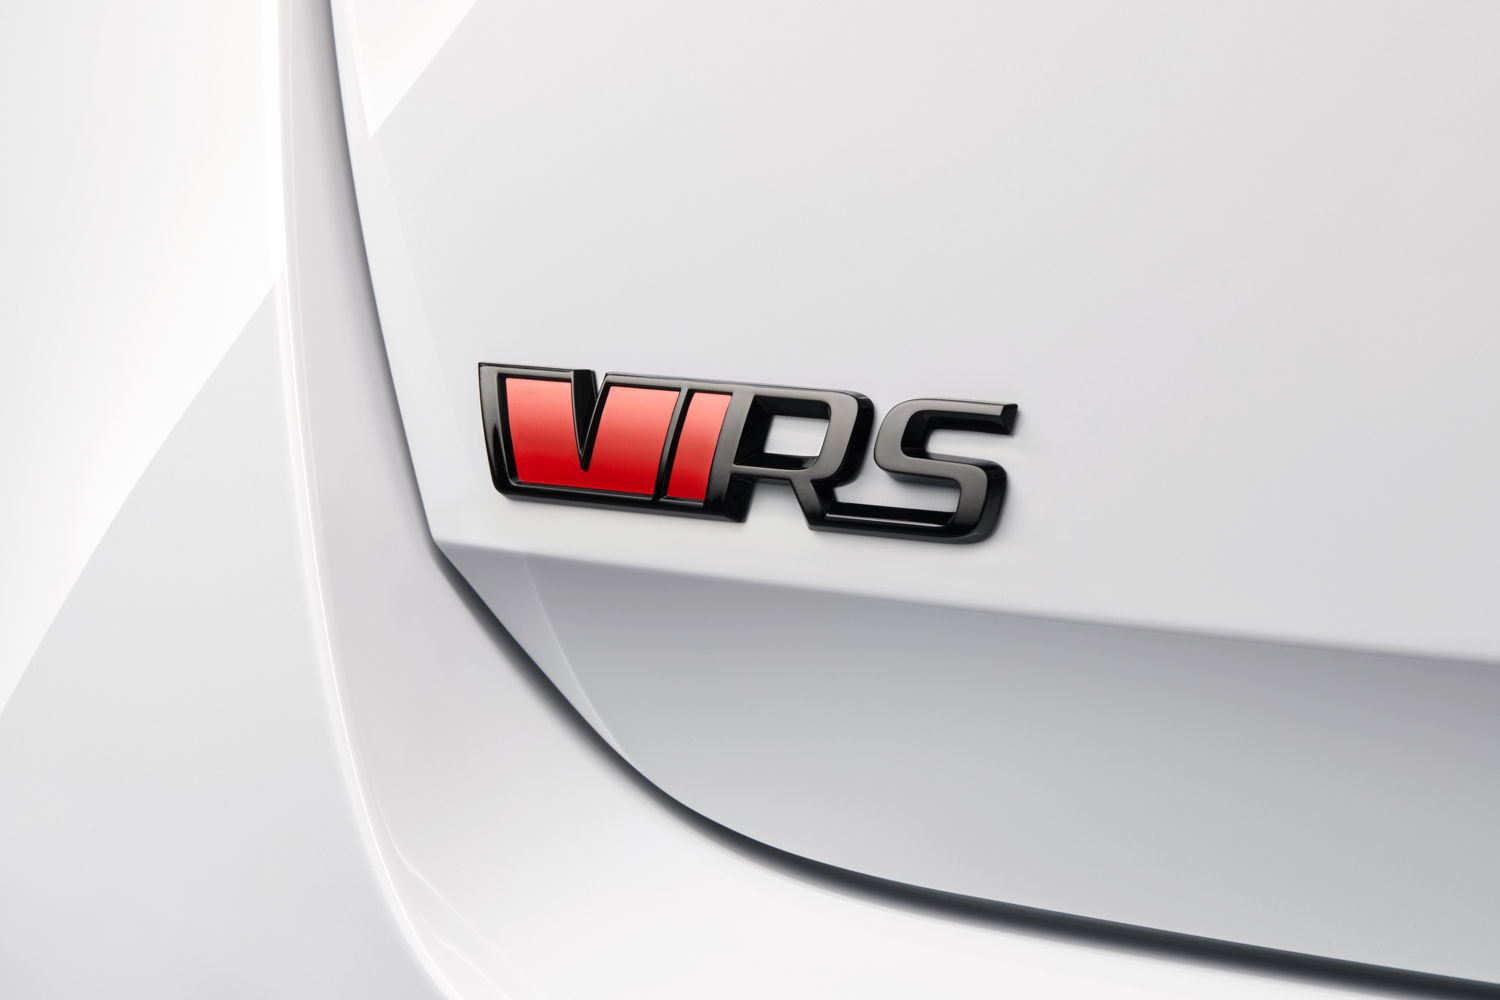 The fourth generation of the OCTAVIA will soon be
complemented by the first RS performance model to
feature a plug-in hybrid powertrain.